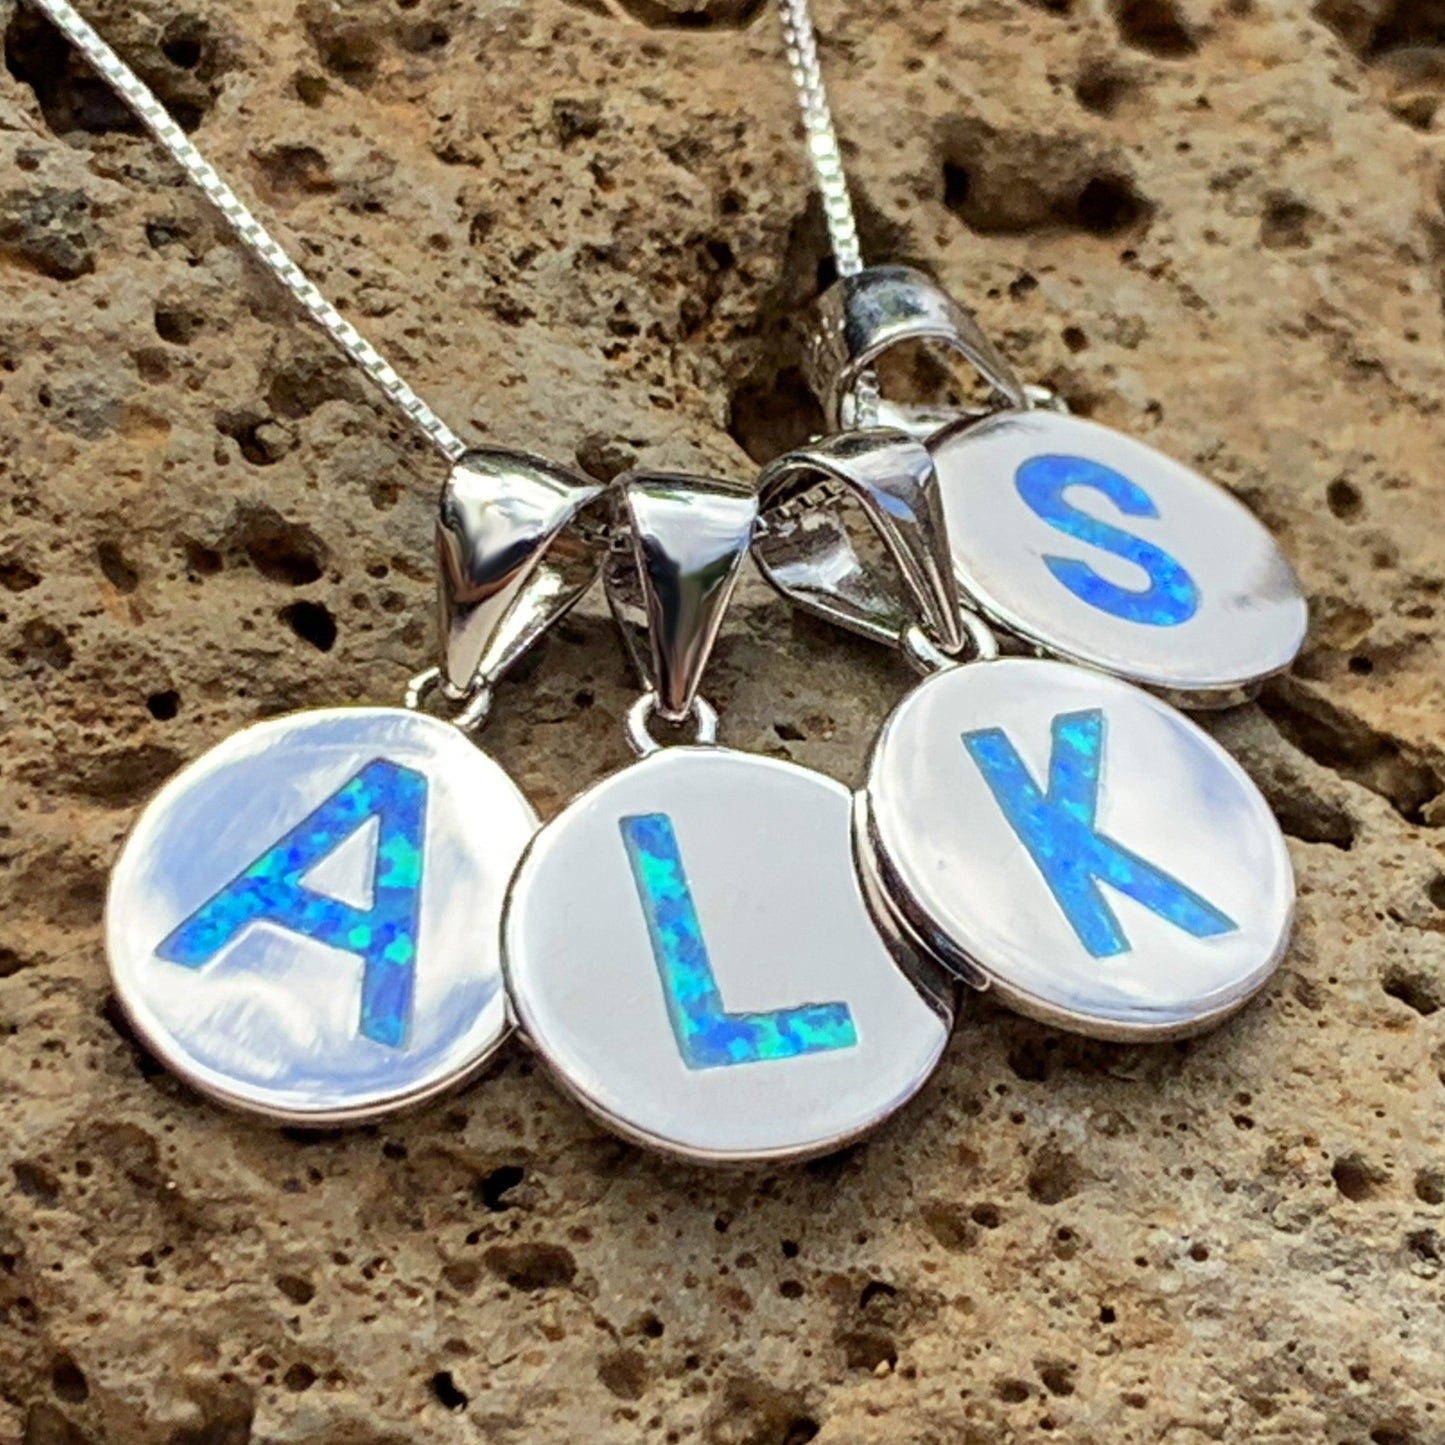 Opalite initials on sterling silver.